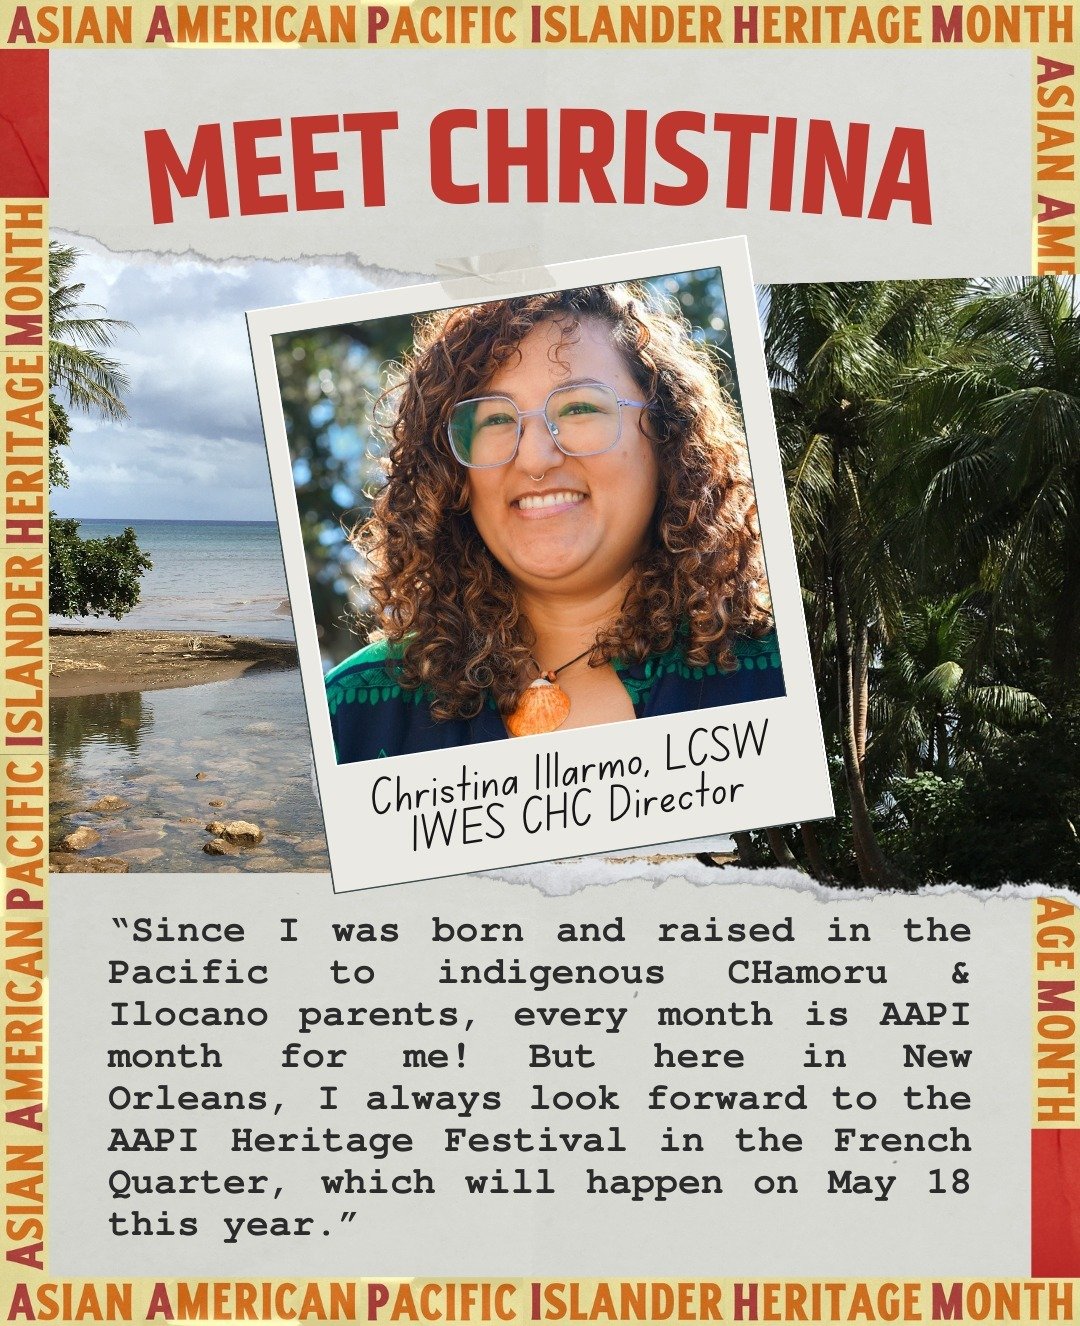 As we continue to celebrate #AAPIHeritageMonth we're excited to spotlight Christina Illarmo, the Director of our Mental Health Division, the Collective for Healthy Communities! ☀️ Christina is a CHamoru-Ilocano social worker born and raised on Guahan